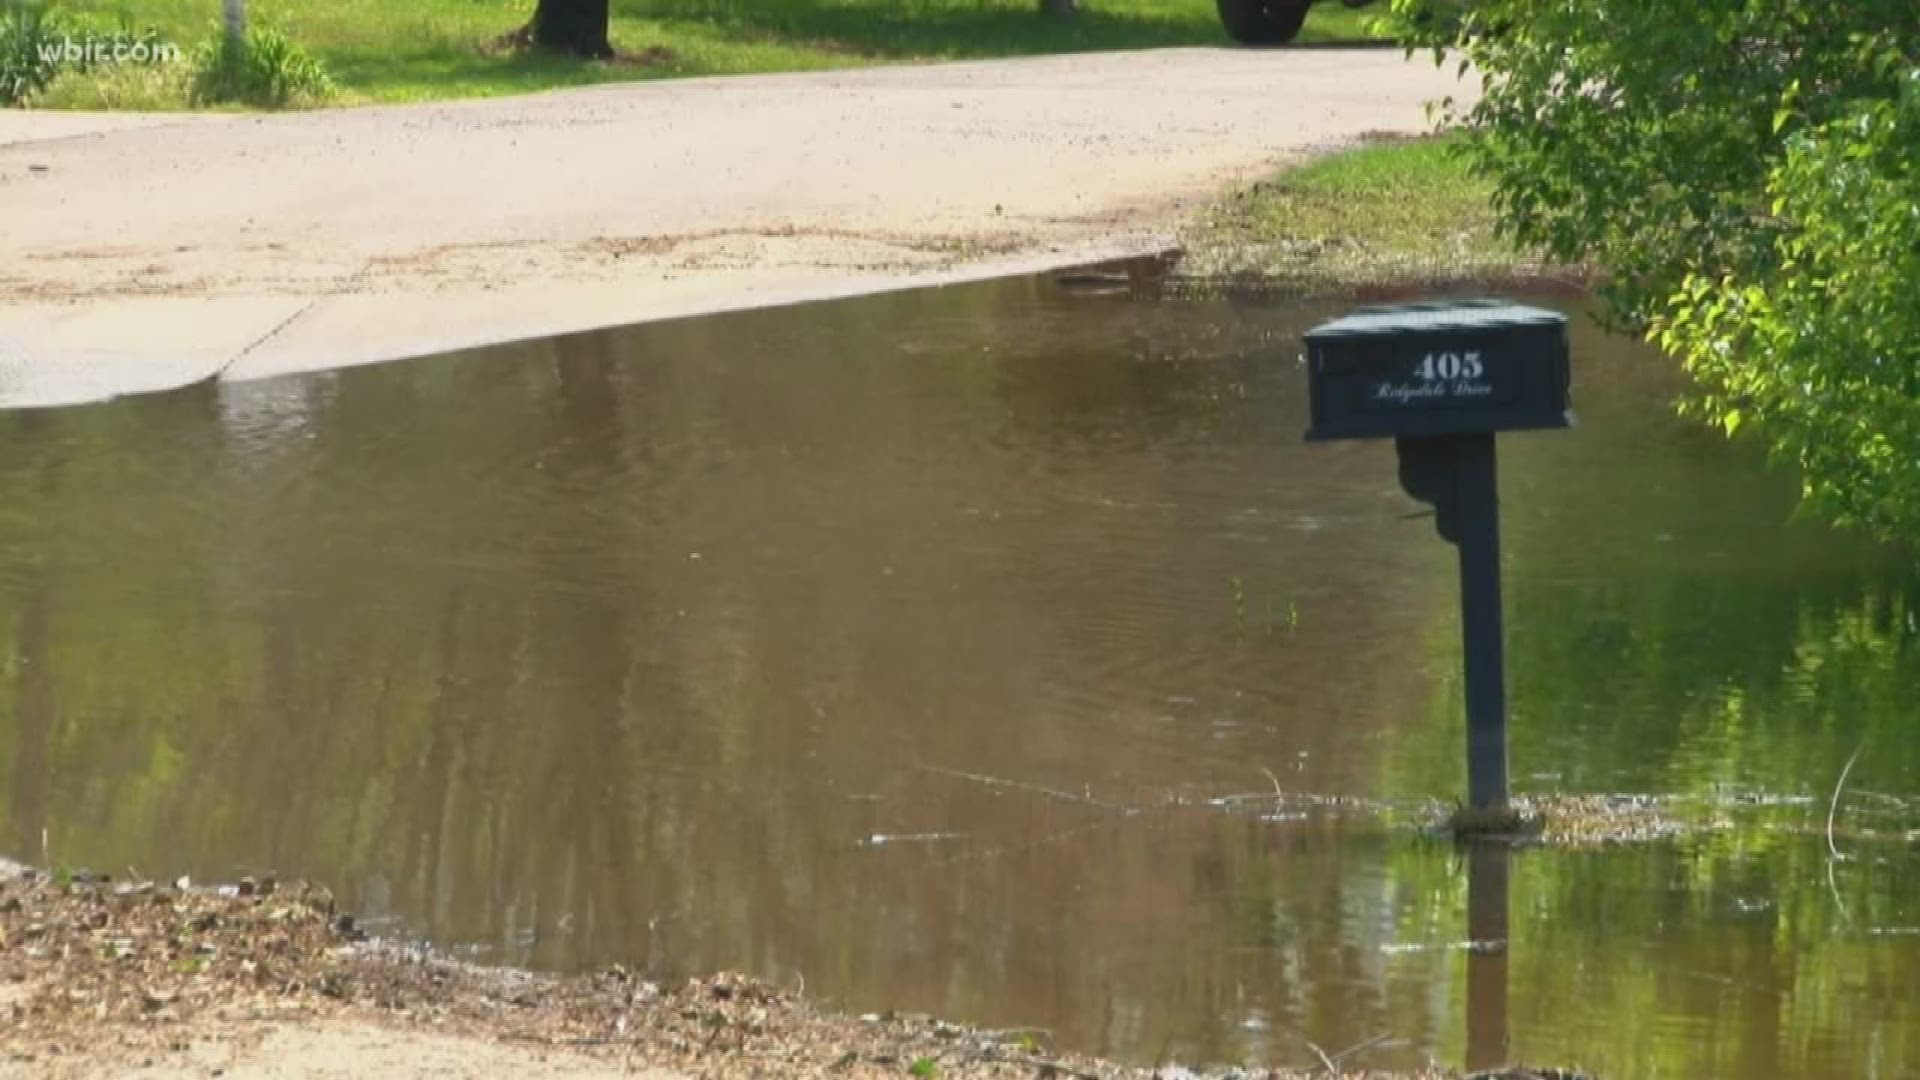 Jefferson County commissioners are paying to help pump water out of a neighborhood still flooded by February's heavy rain showers.